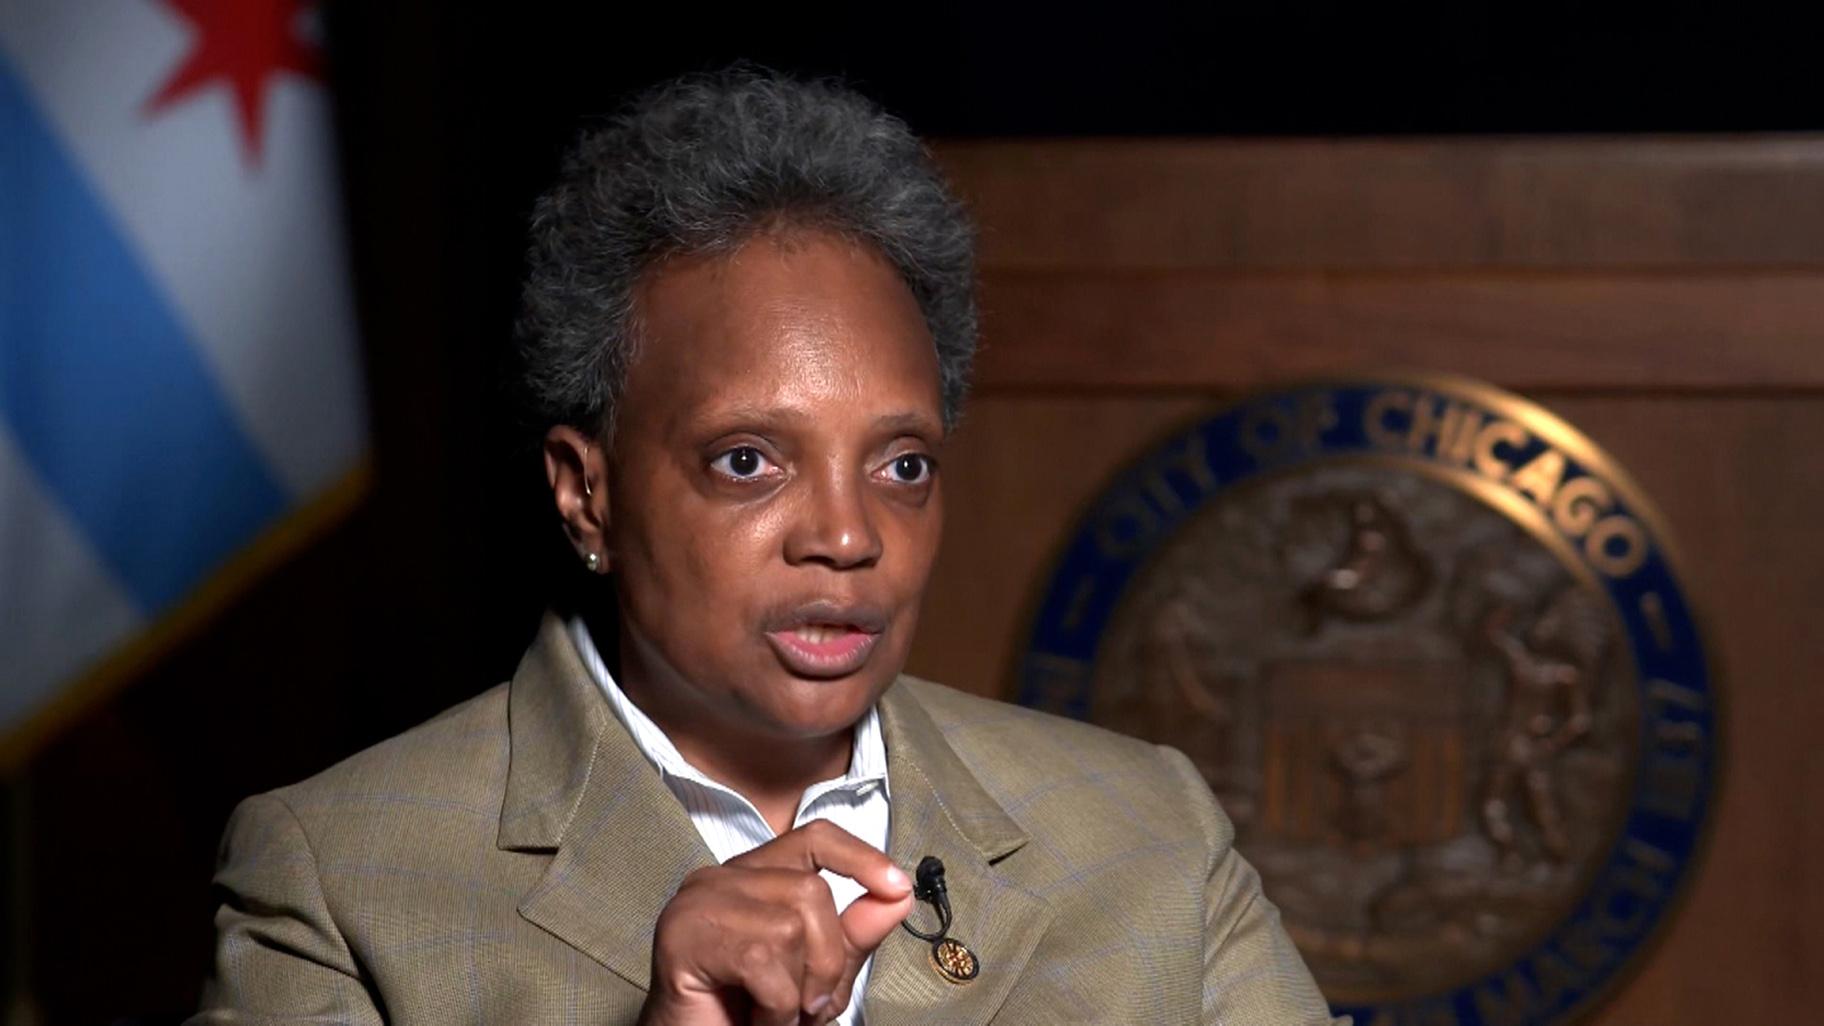 Chicago Mayor Lori Lightfoot says relying primarily on law enforcement to fight crime, without other support for communities, doesn't work. (Leonel Mendez / CNN)